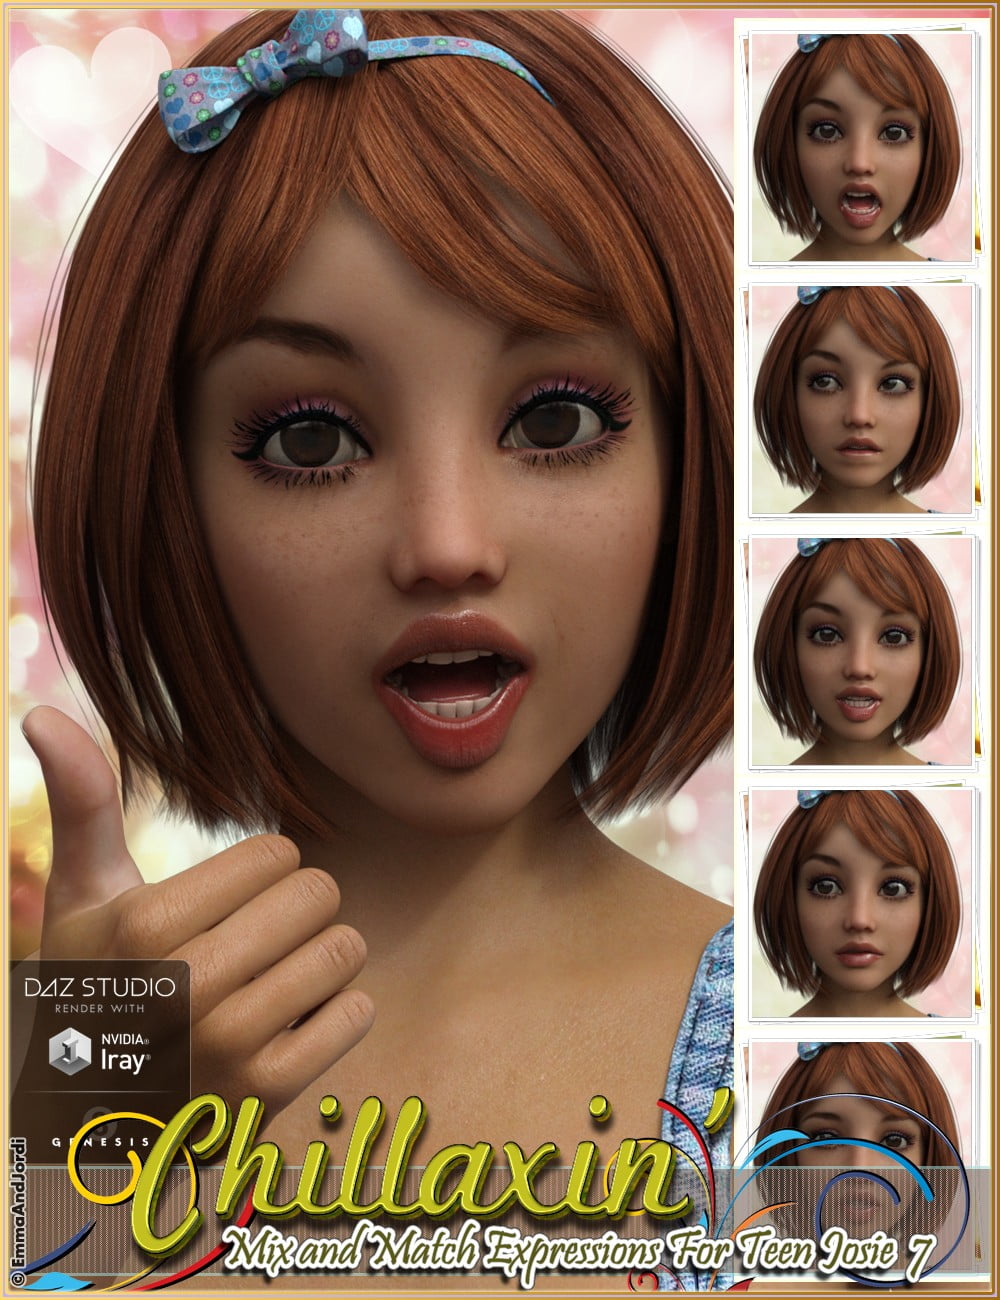 00-main-chillaxin-mix-and-match-expressions-for-teen-josie-7-daz3d